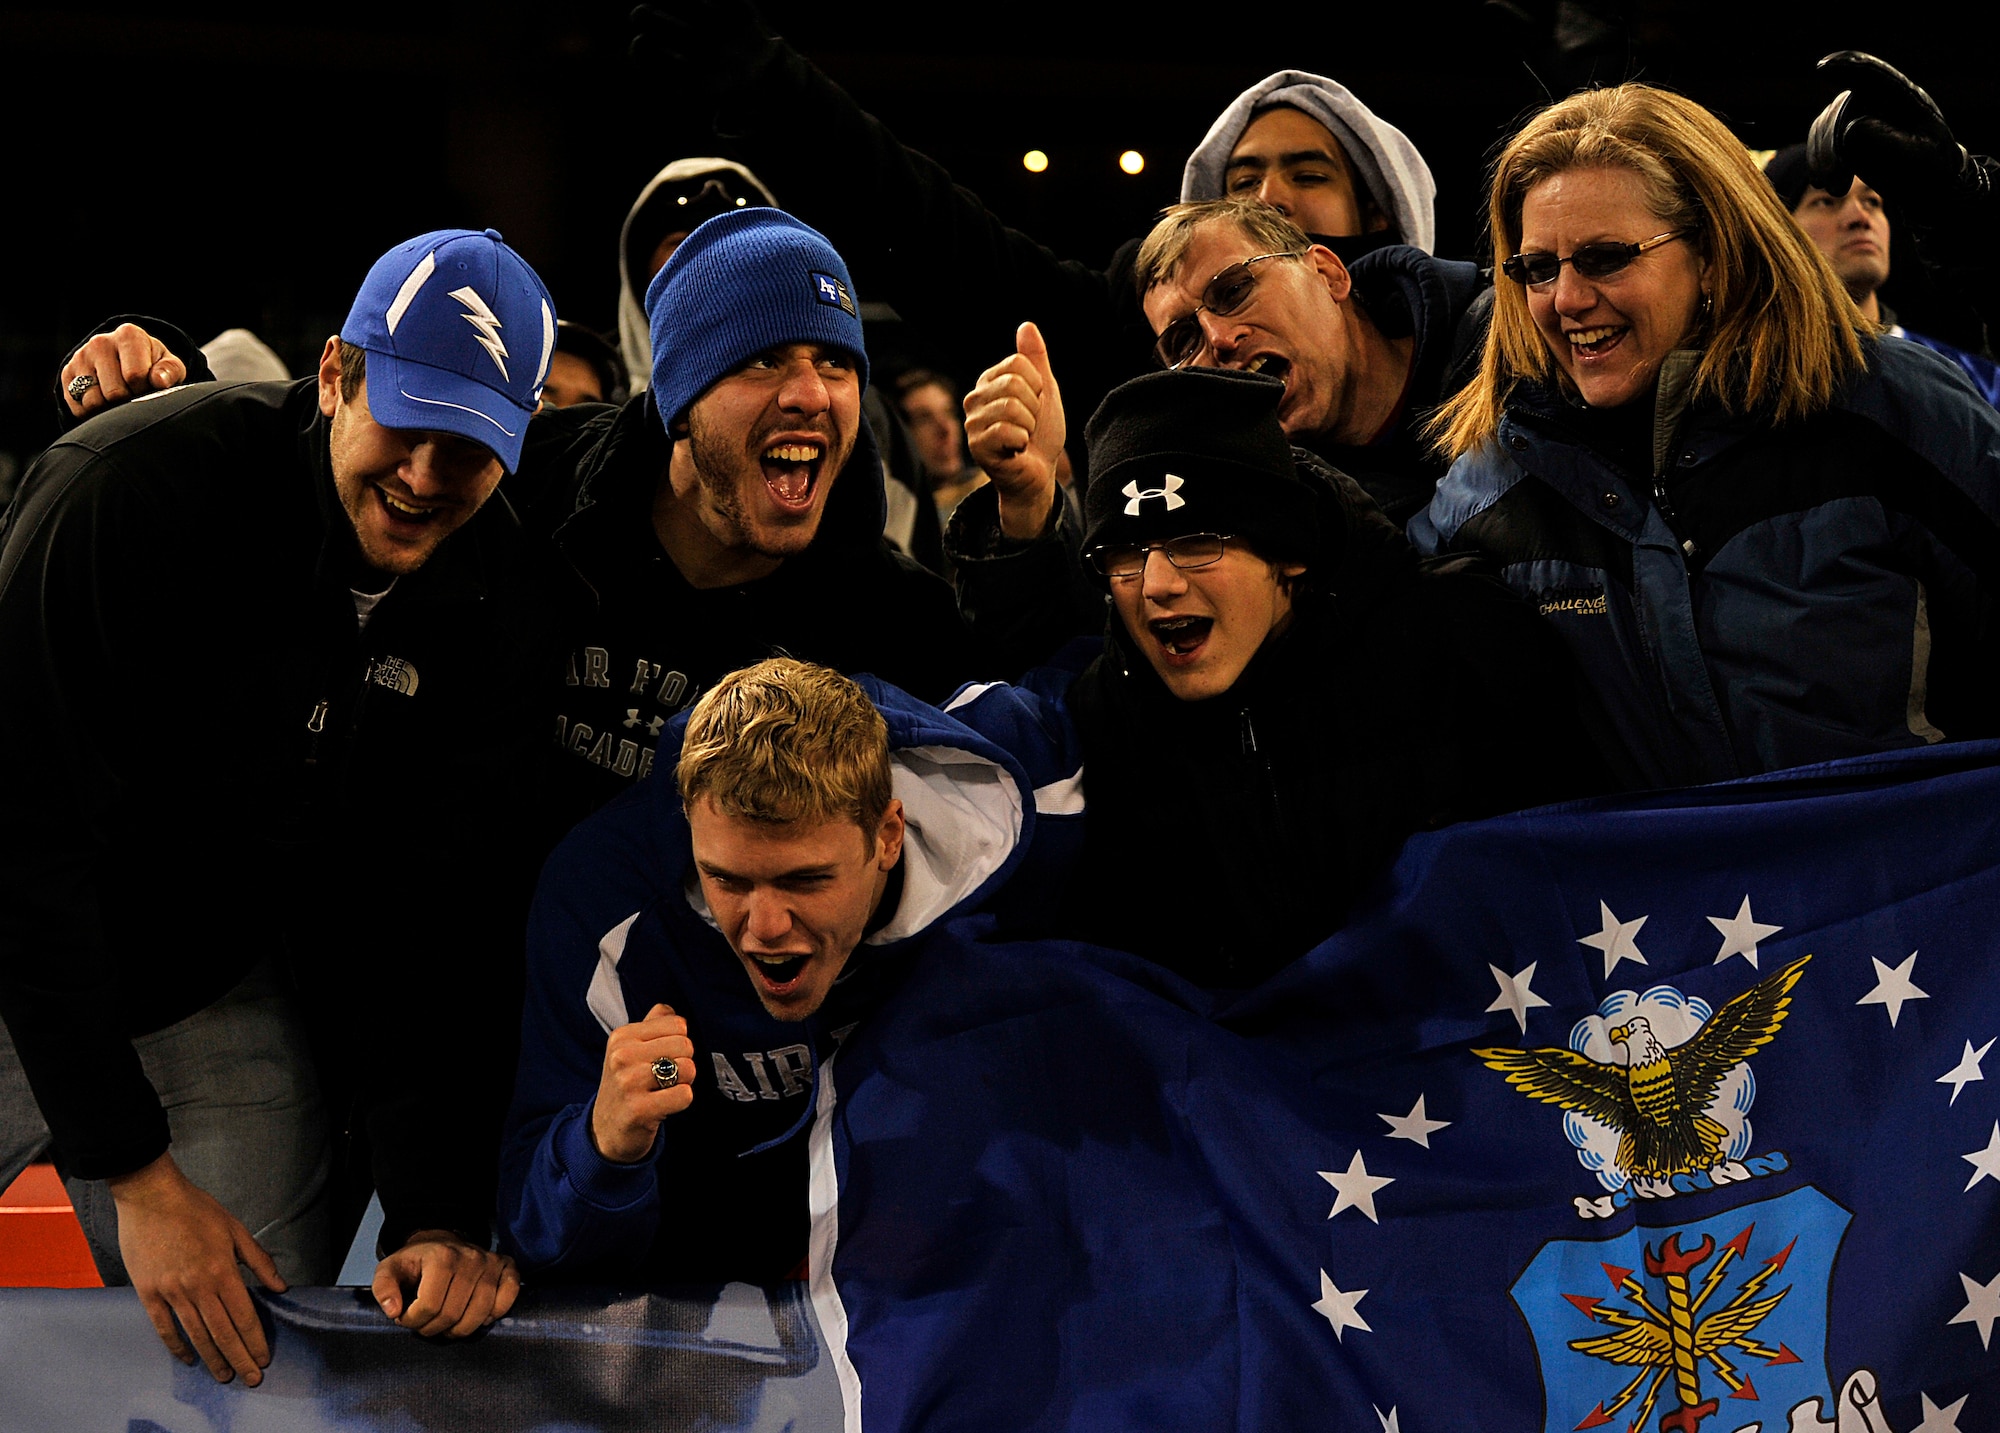 U.S. Air Force Academy fans cheer during the football game against Toledo University on December 28, 2011 at RFK stadium for the 2011 Military Bowl. Toledo won the game with a 42-41 victory. (U.S. Air Force Photo by: MSgt Jeremy Lock) (Released)
